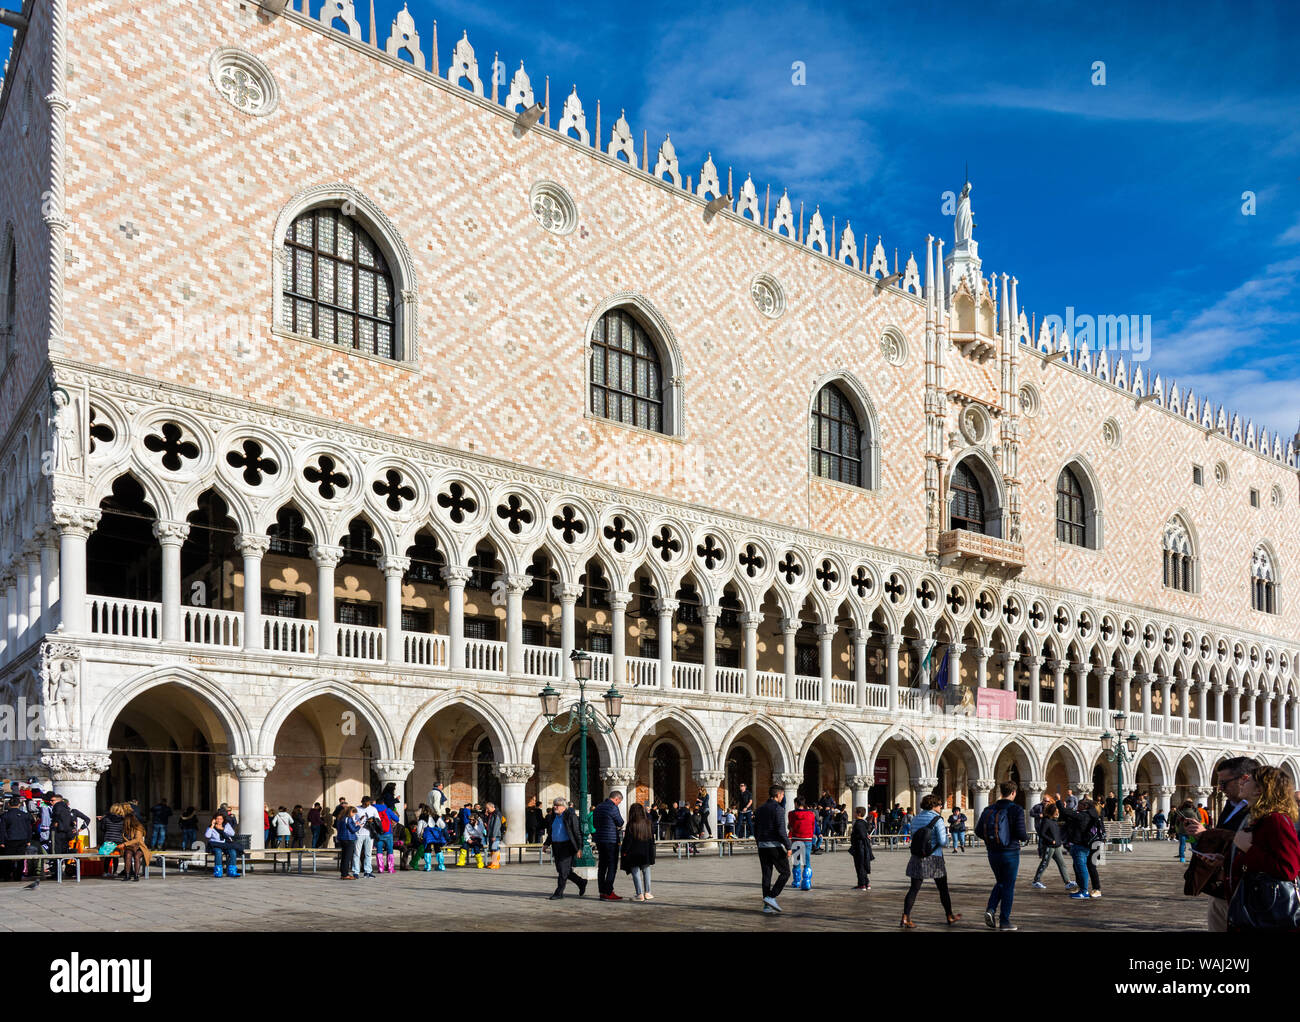 The Doge's Palace (Palazzo Ducale) from the Riva degli Schiavoni, Venice, Italy Stock Photo